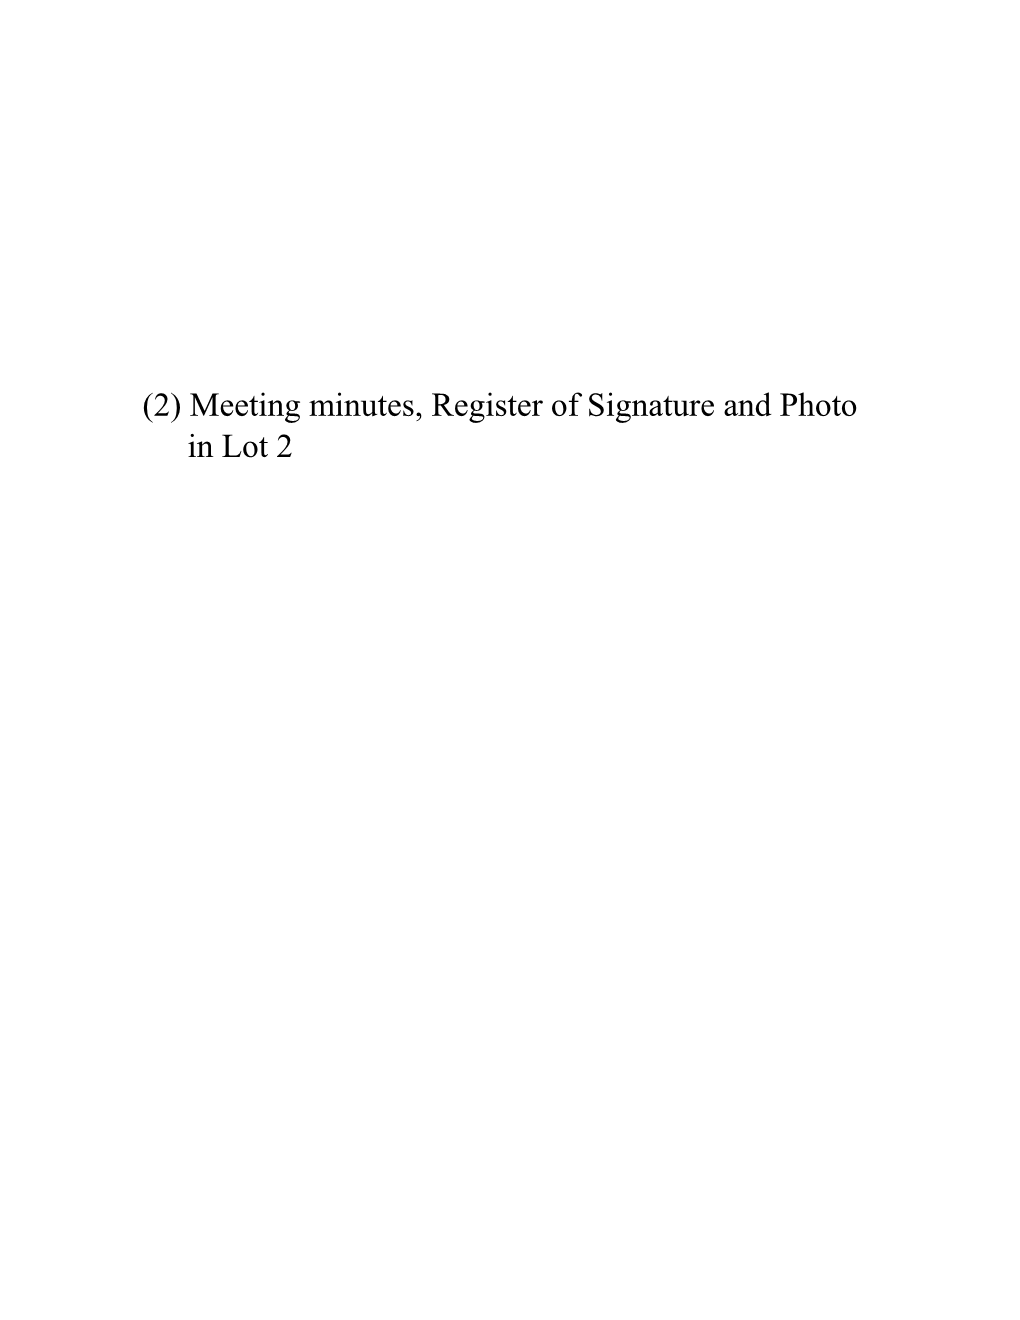 Meeting Minutes, Register of Signature and Photo in Lot 2